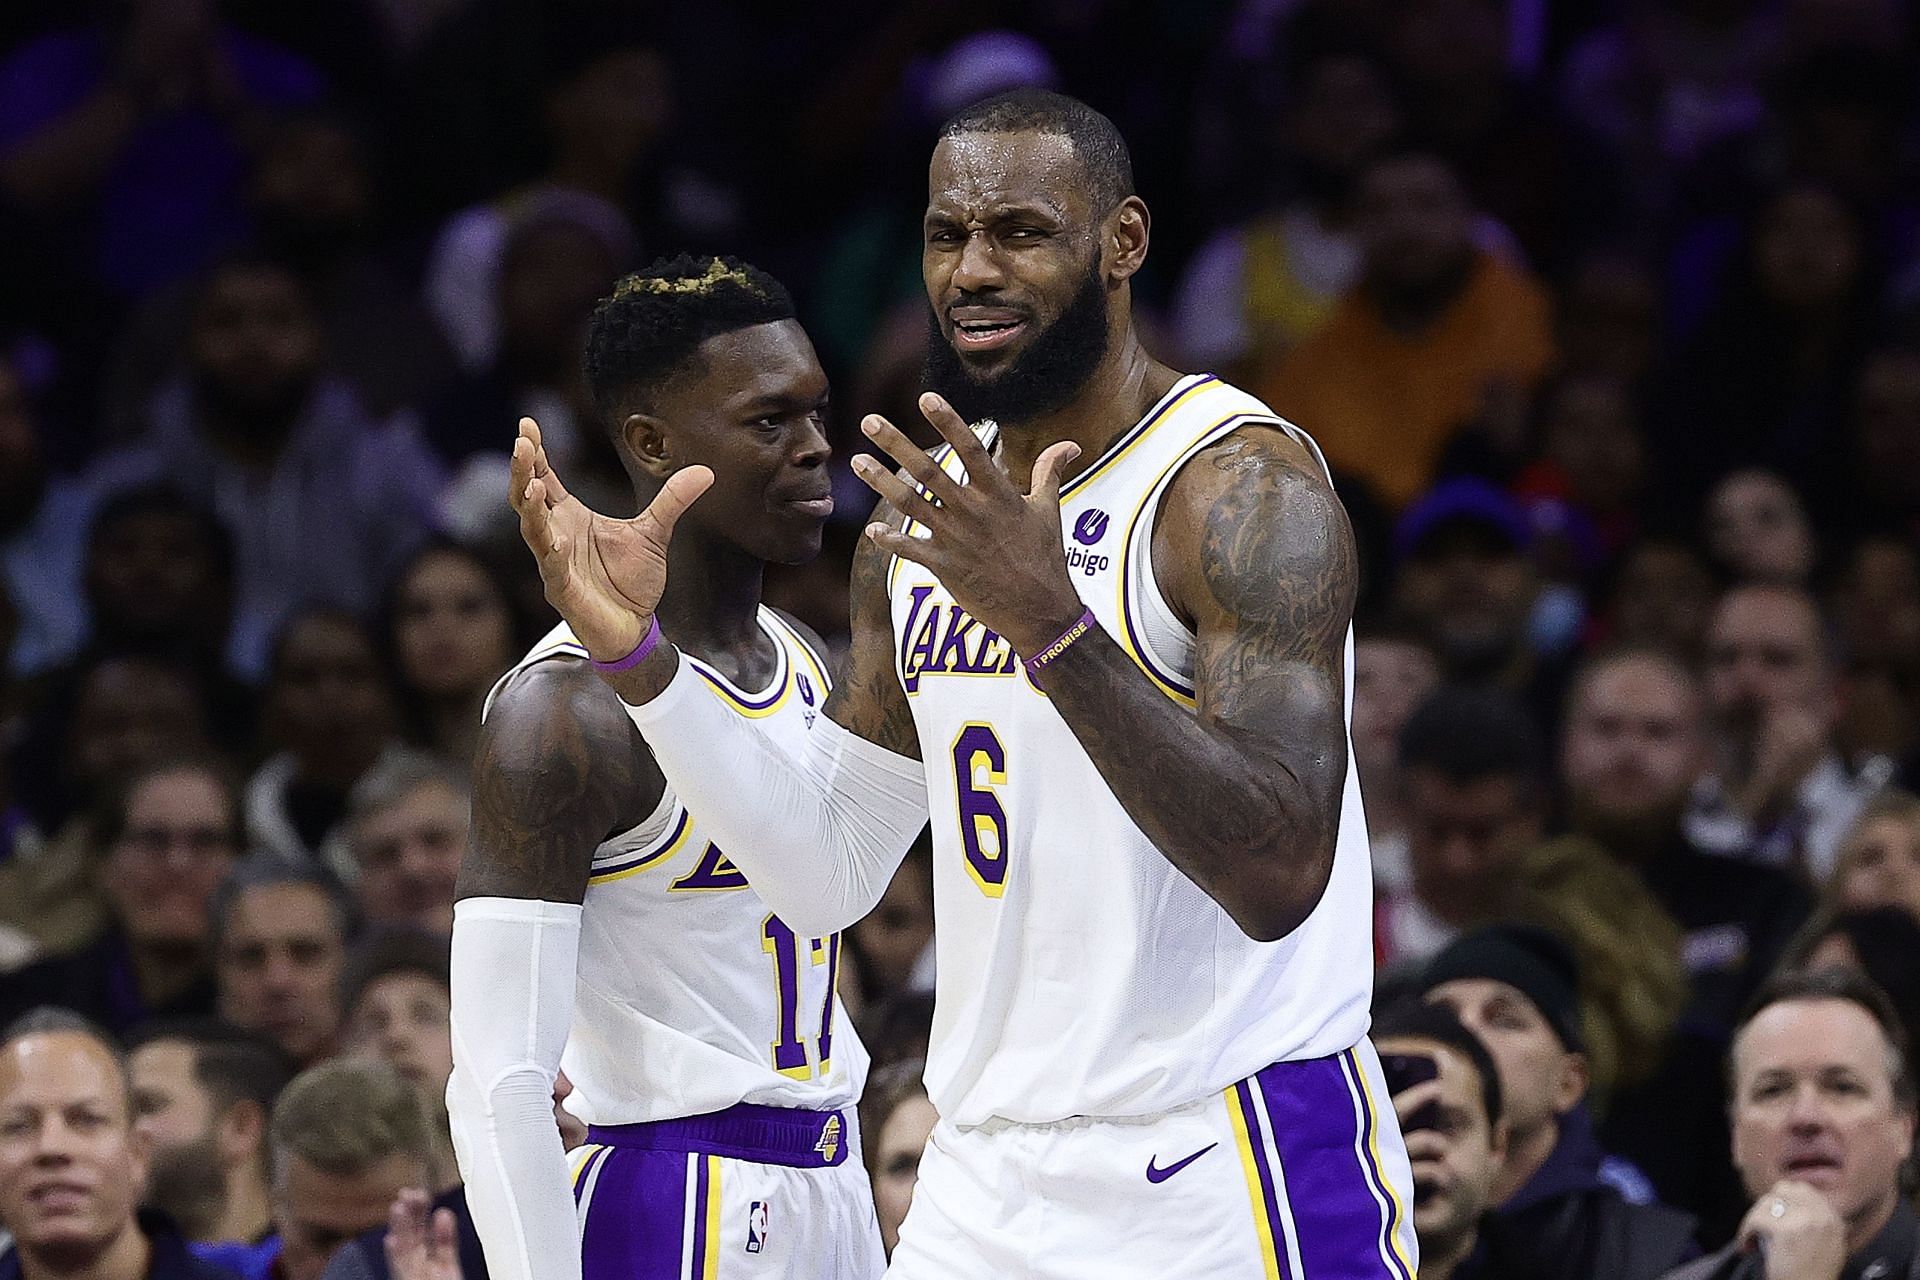 Dennis Schroder and LeBron James  (right) of the LA Lakers